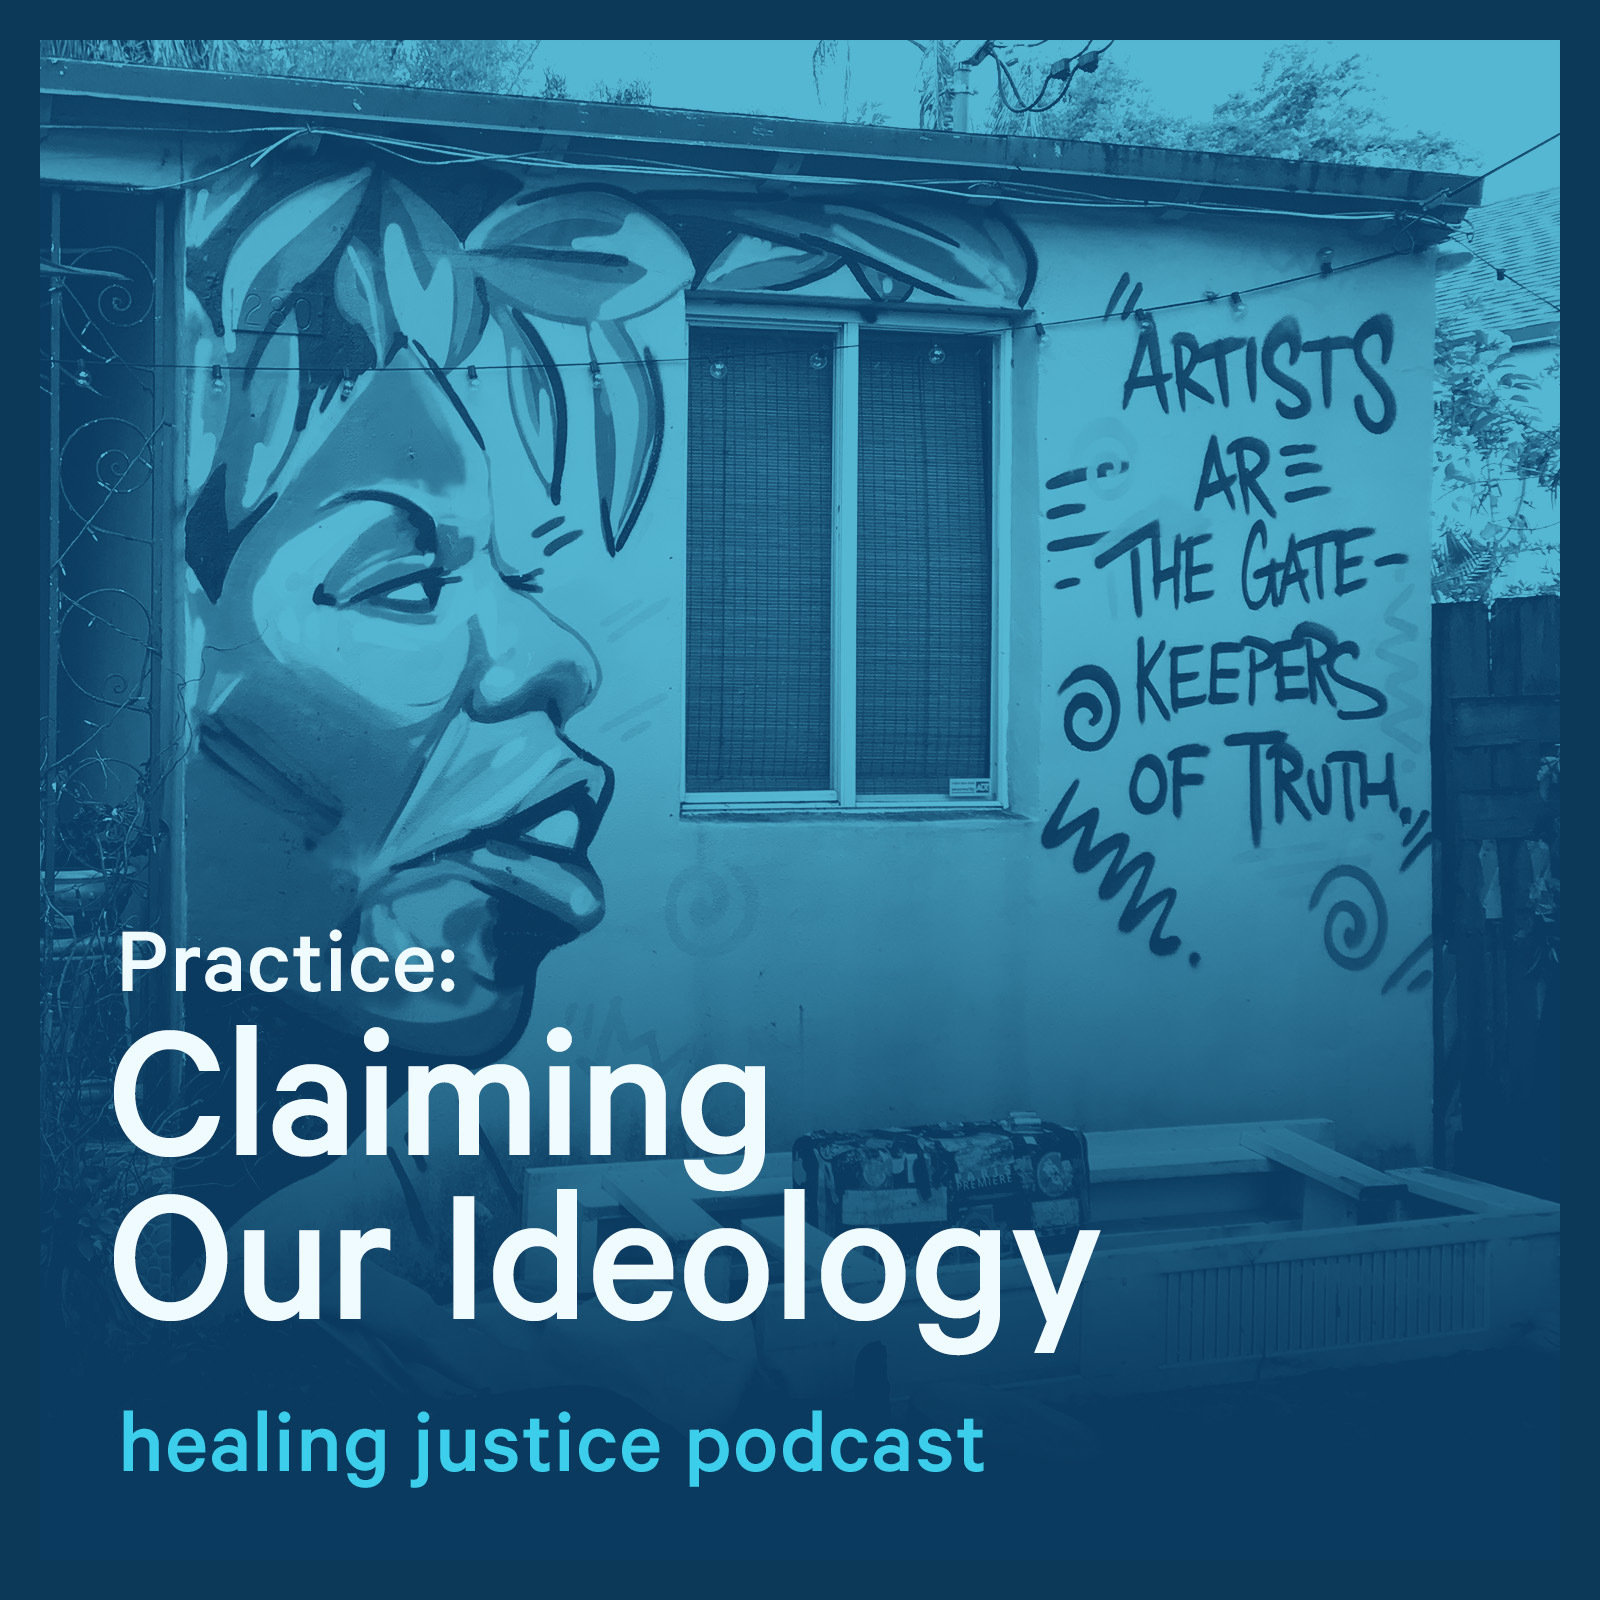 38 Practice: Claiming Our Ideology, inspired by Phillip Agnew